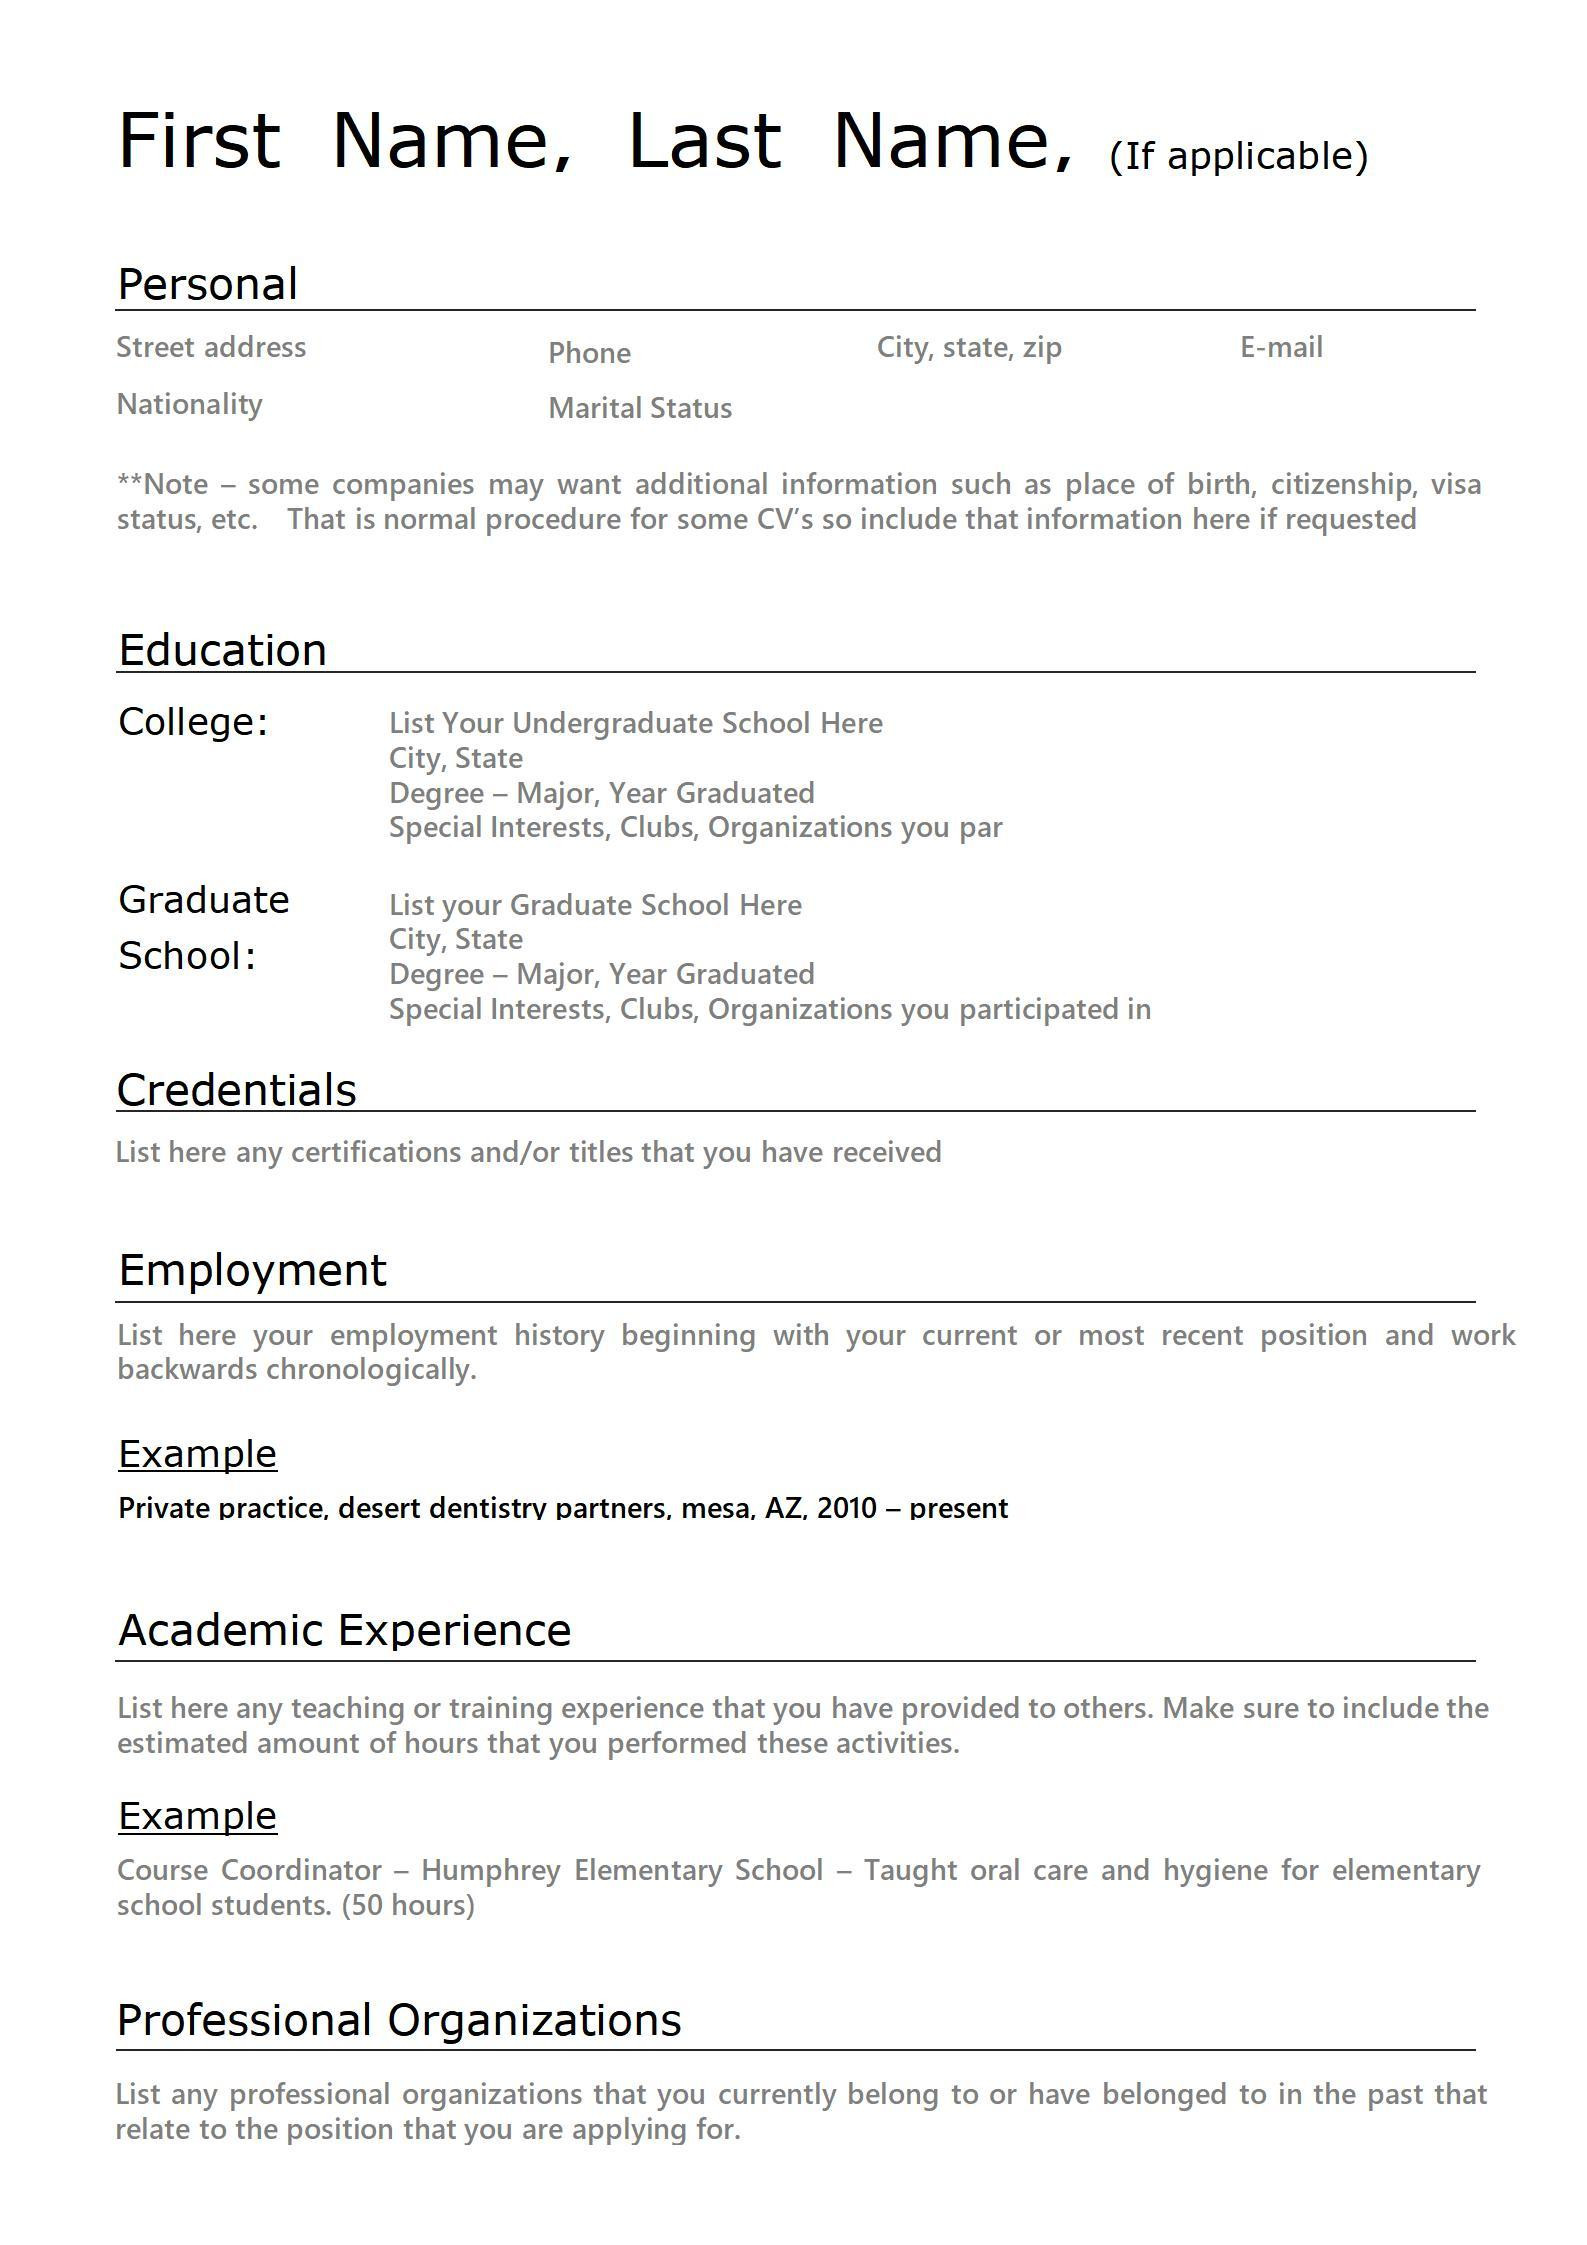 First Job Resume Sample for High Schooler First-time Resume with No Experience Samples Wps Office Academy